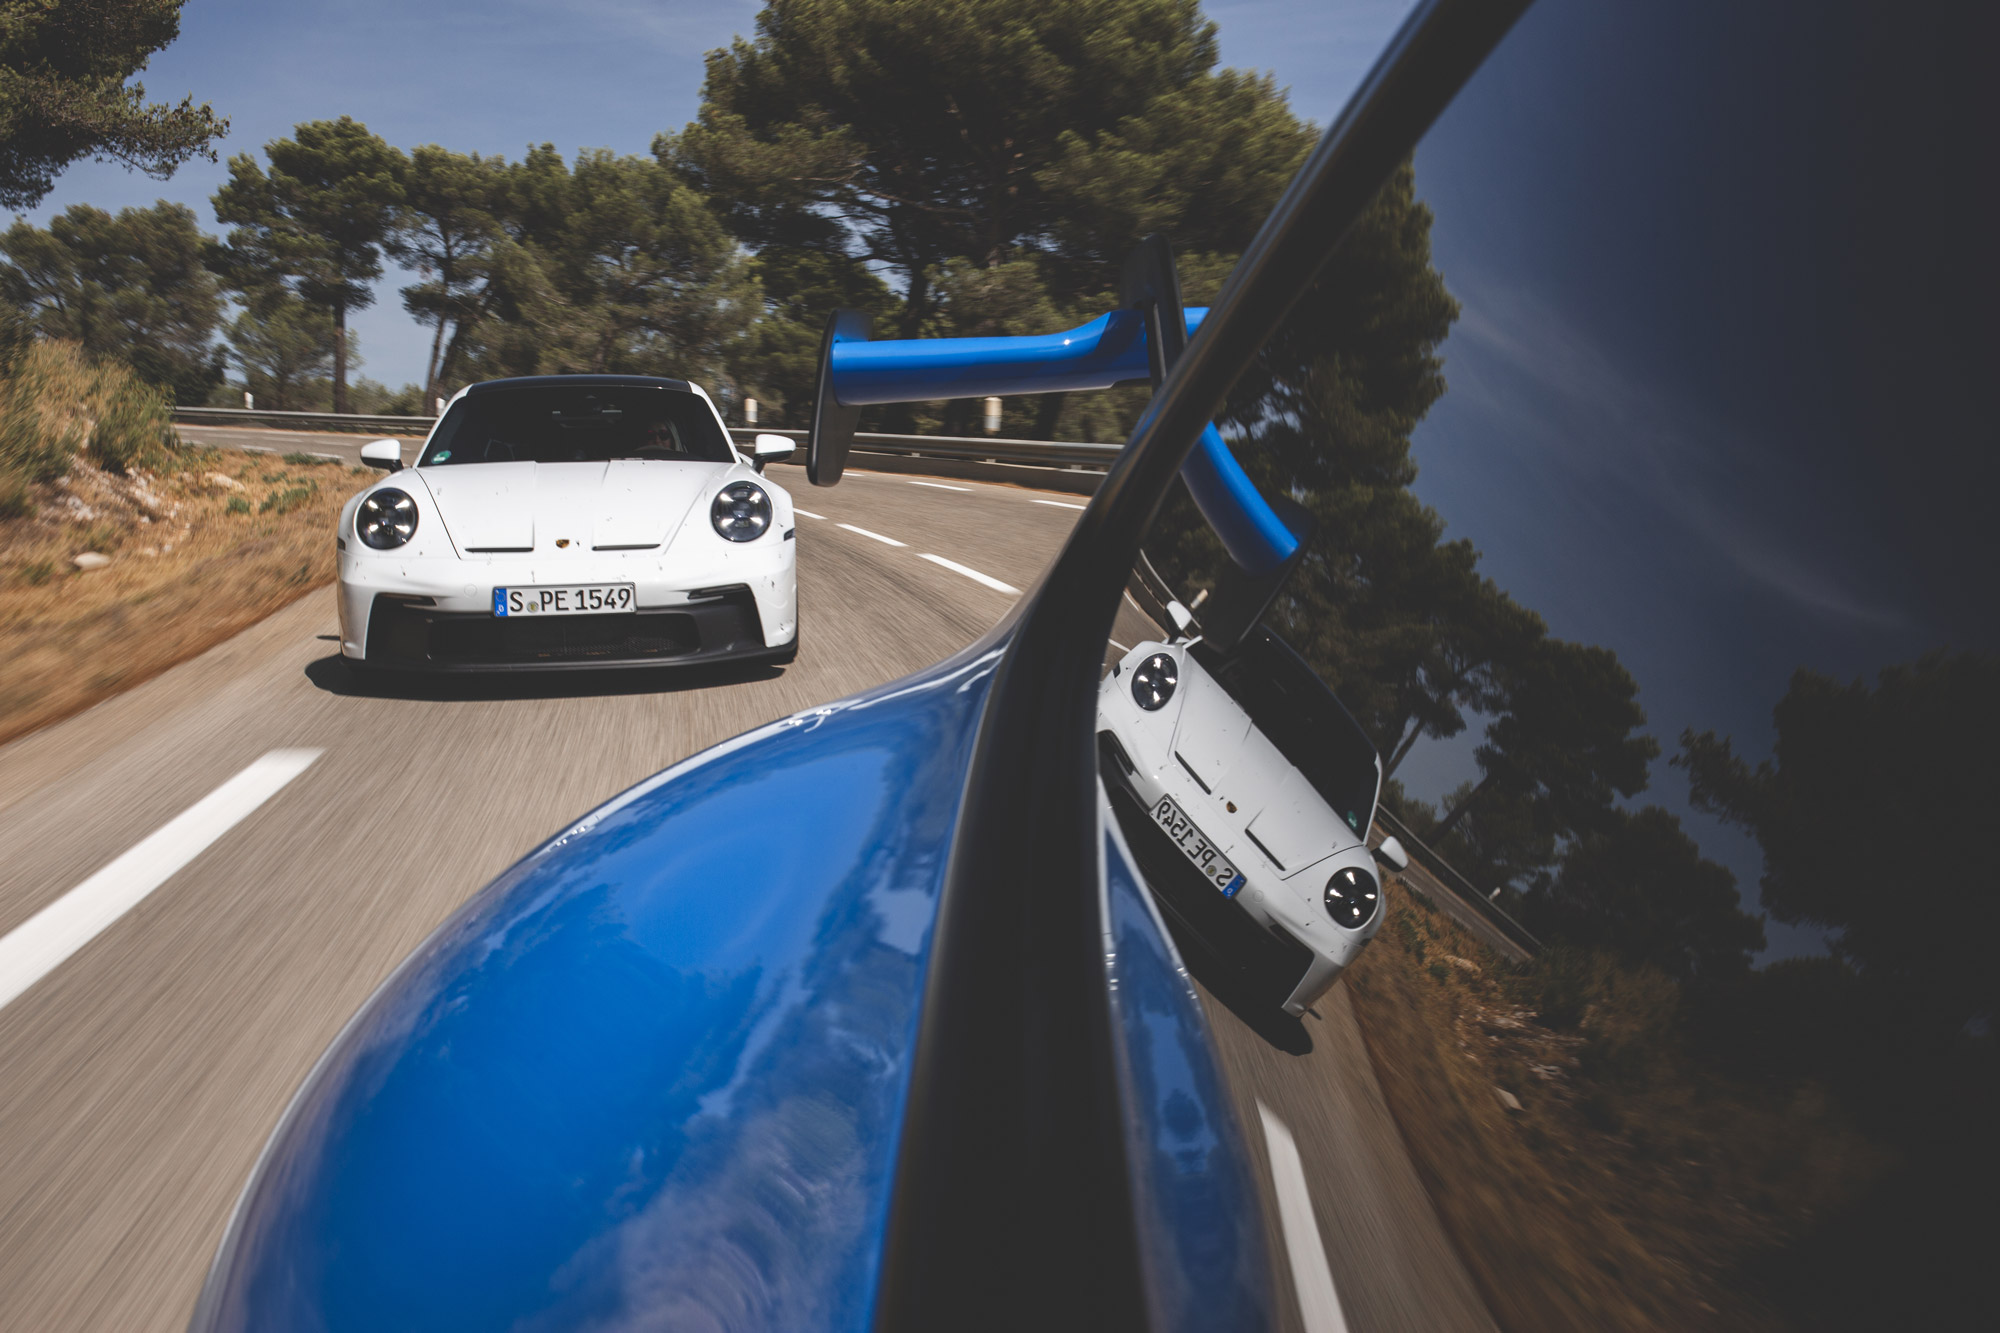 Two Porsche 911 GT3 cars driving on French hillside roads